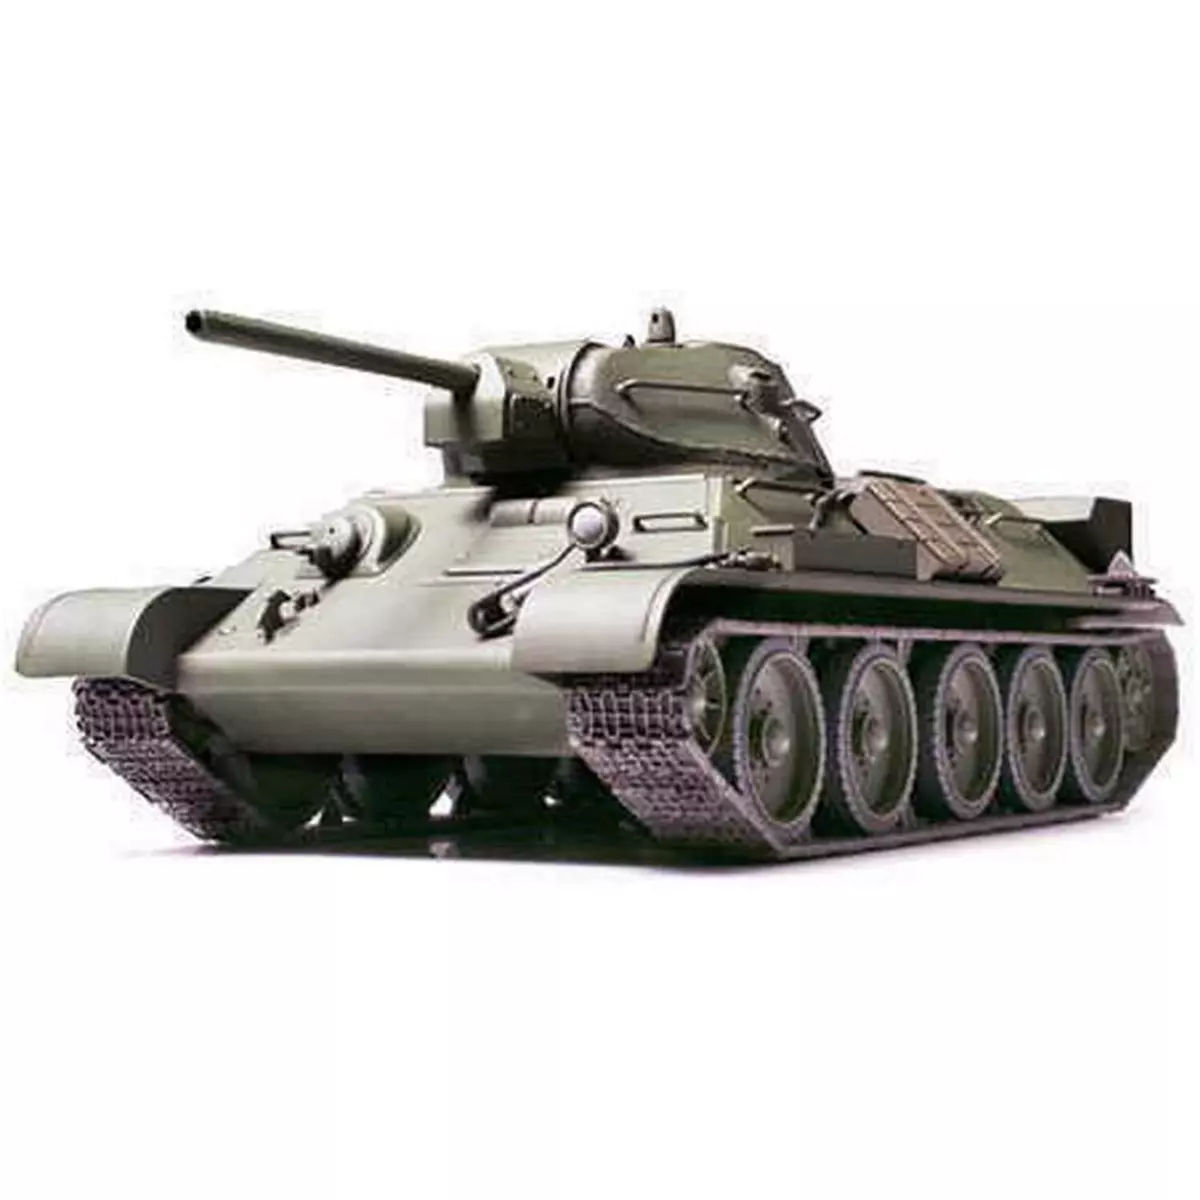 Tamiya Maquette véhicule militaire : Char T34/76 1941